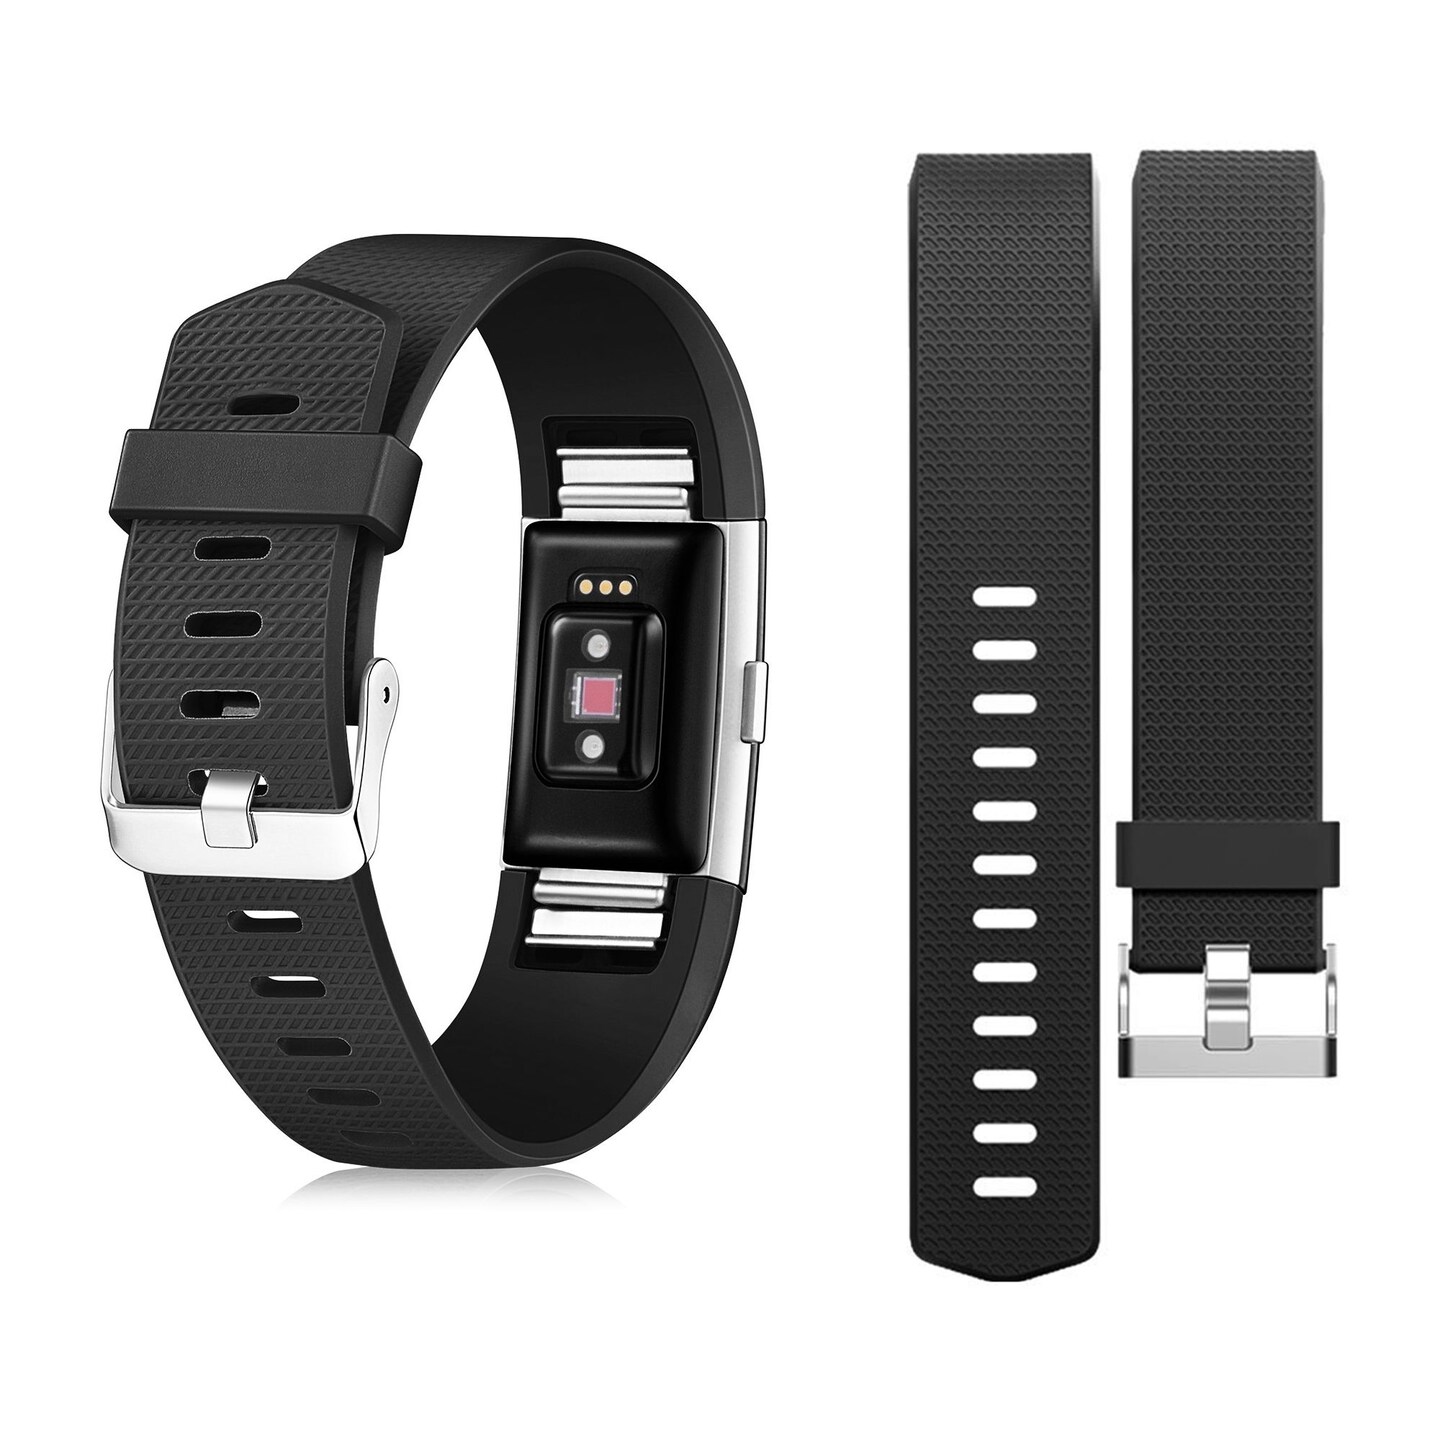 Zodaca Replacement Band for Fitbit Charge 2 Adjustable Sport Band Strap Accessories Wristband with Fasteners and Metal Clasps - Black